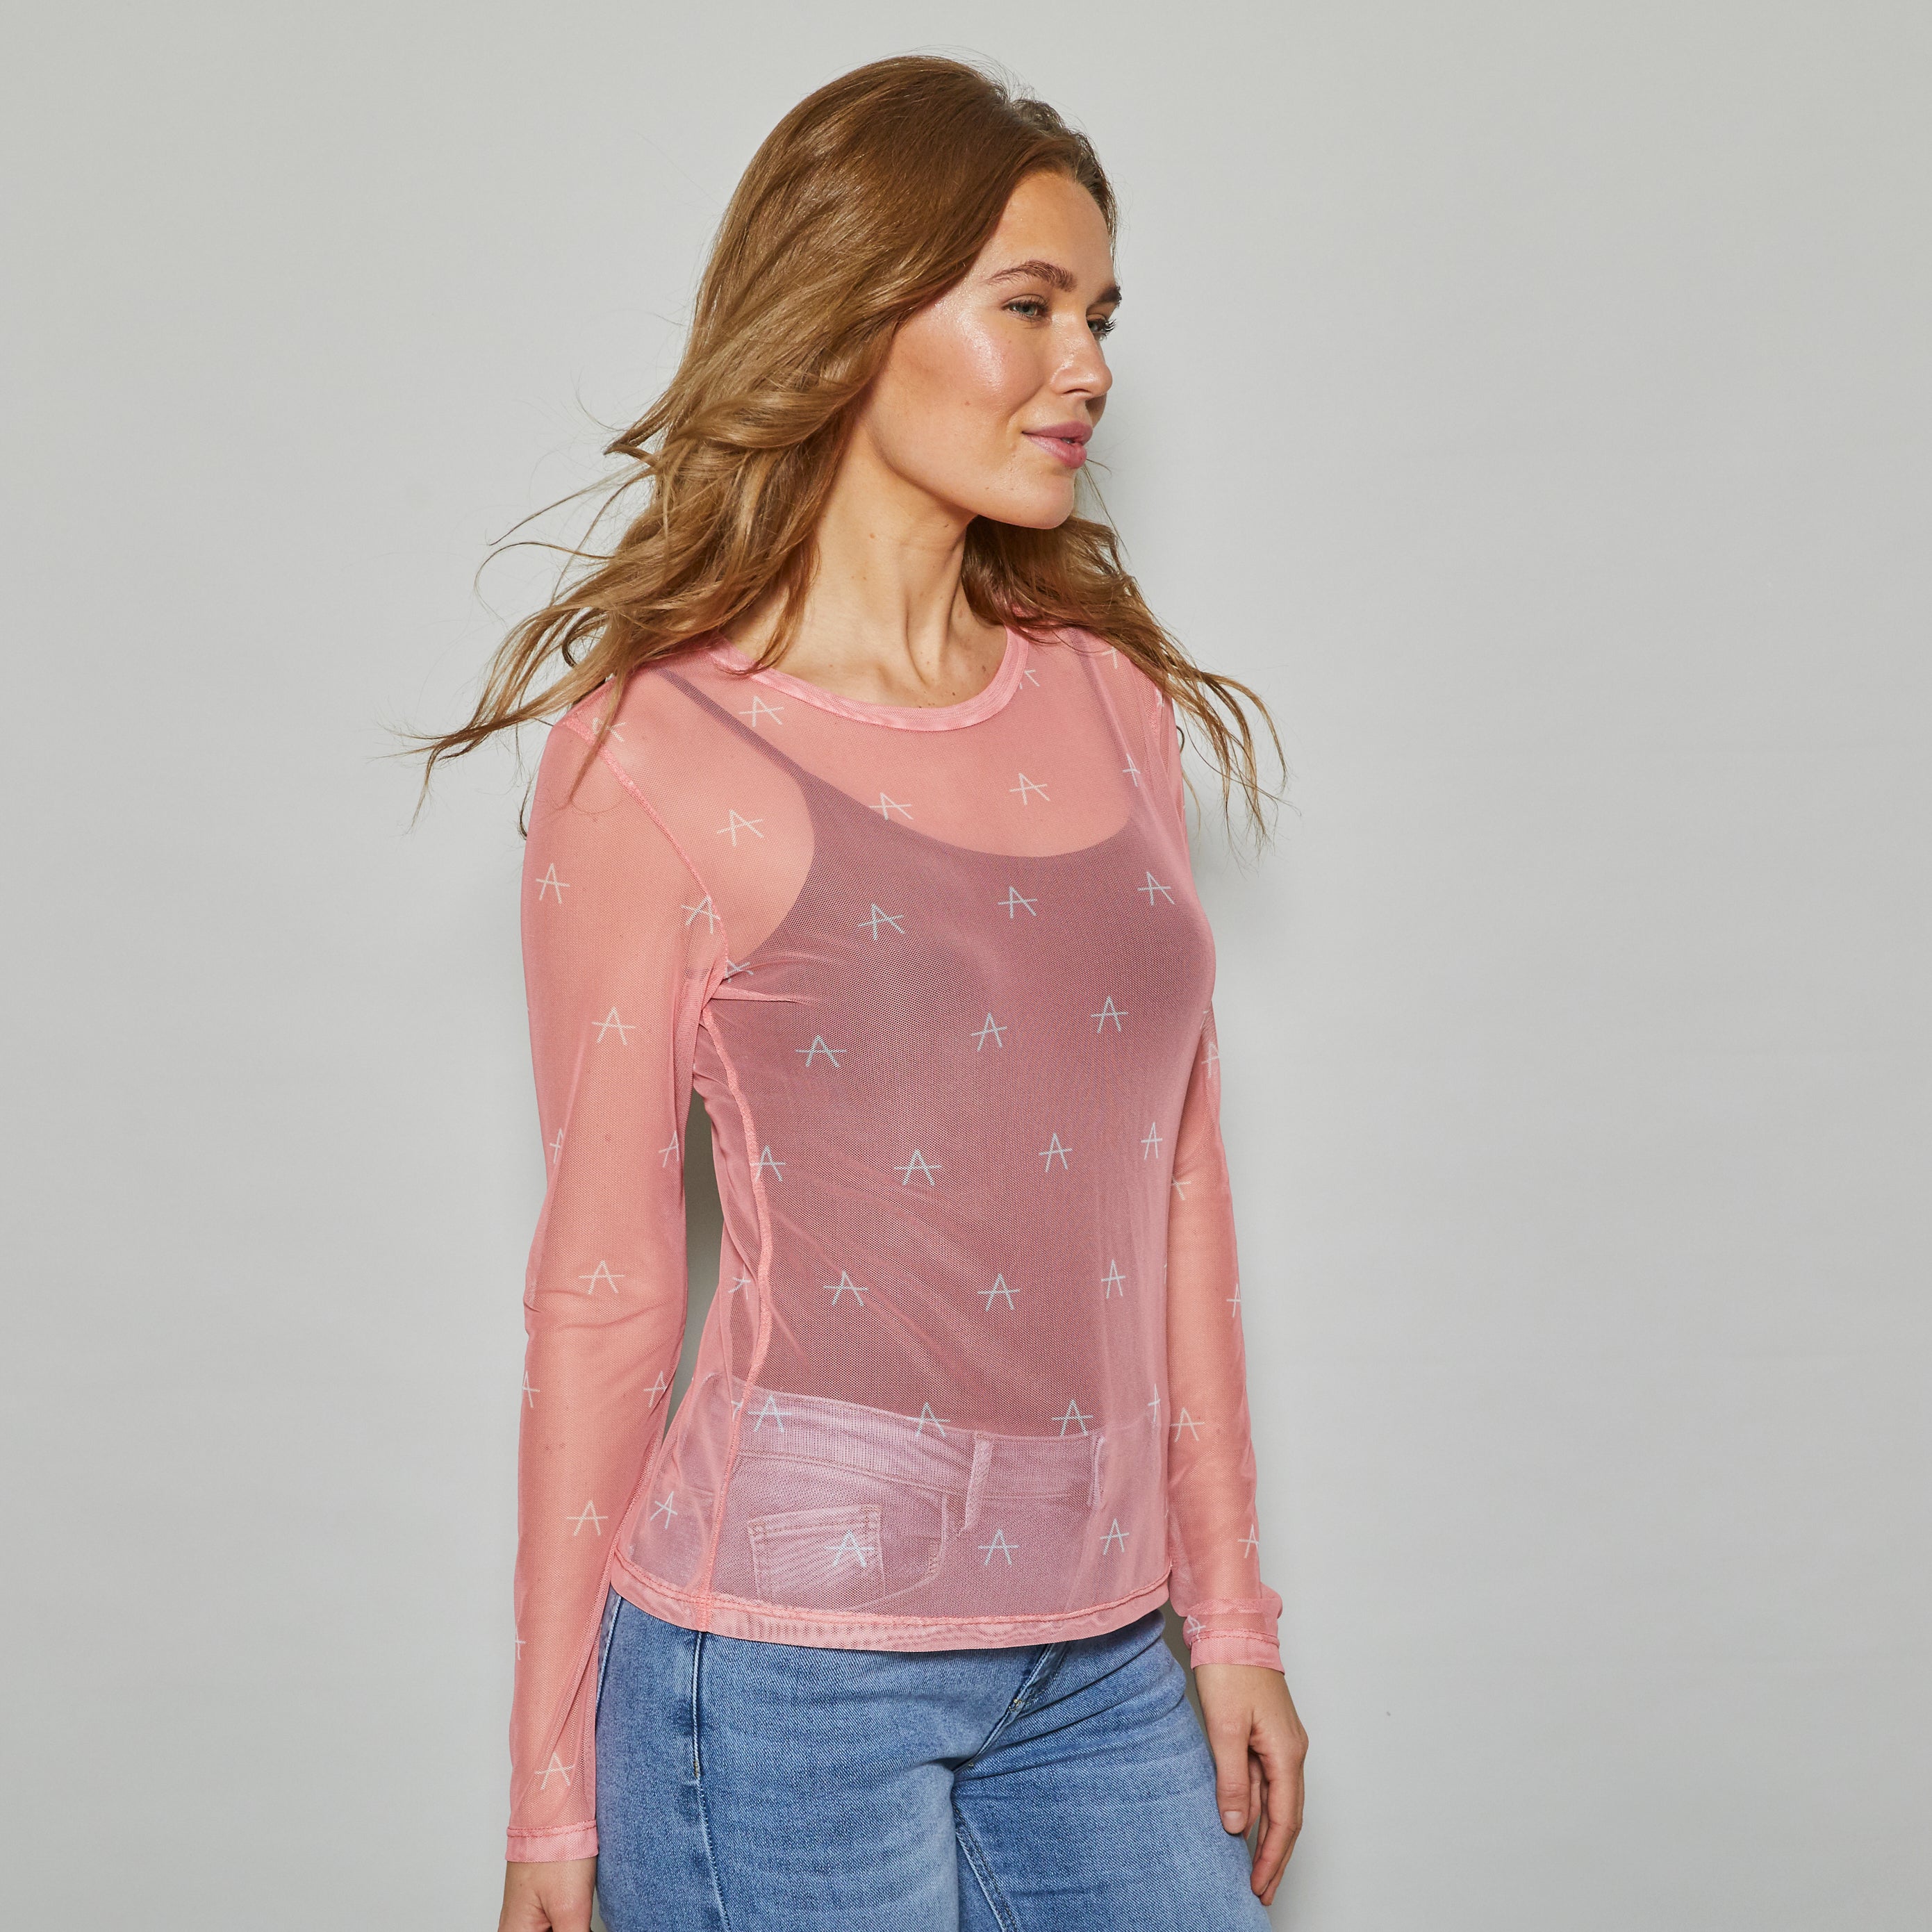 ALLWEEK Fro mesh blouse Blouse Rosa with white A